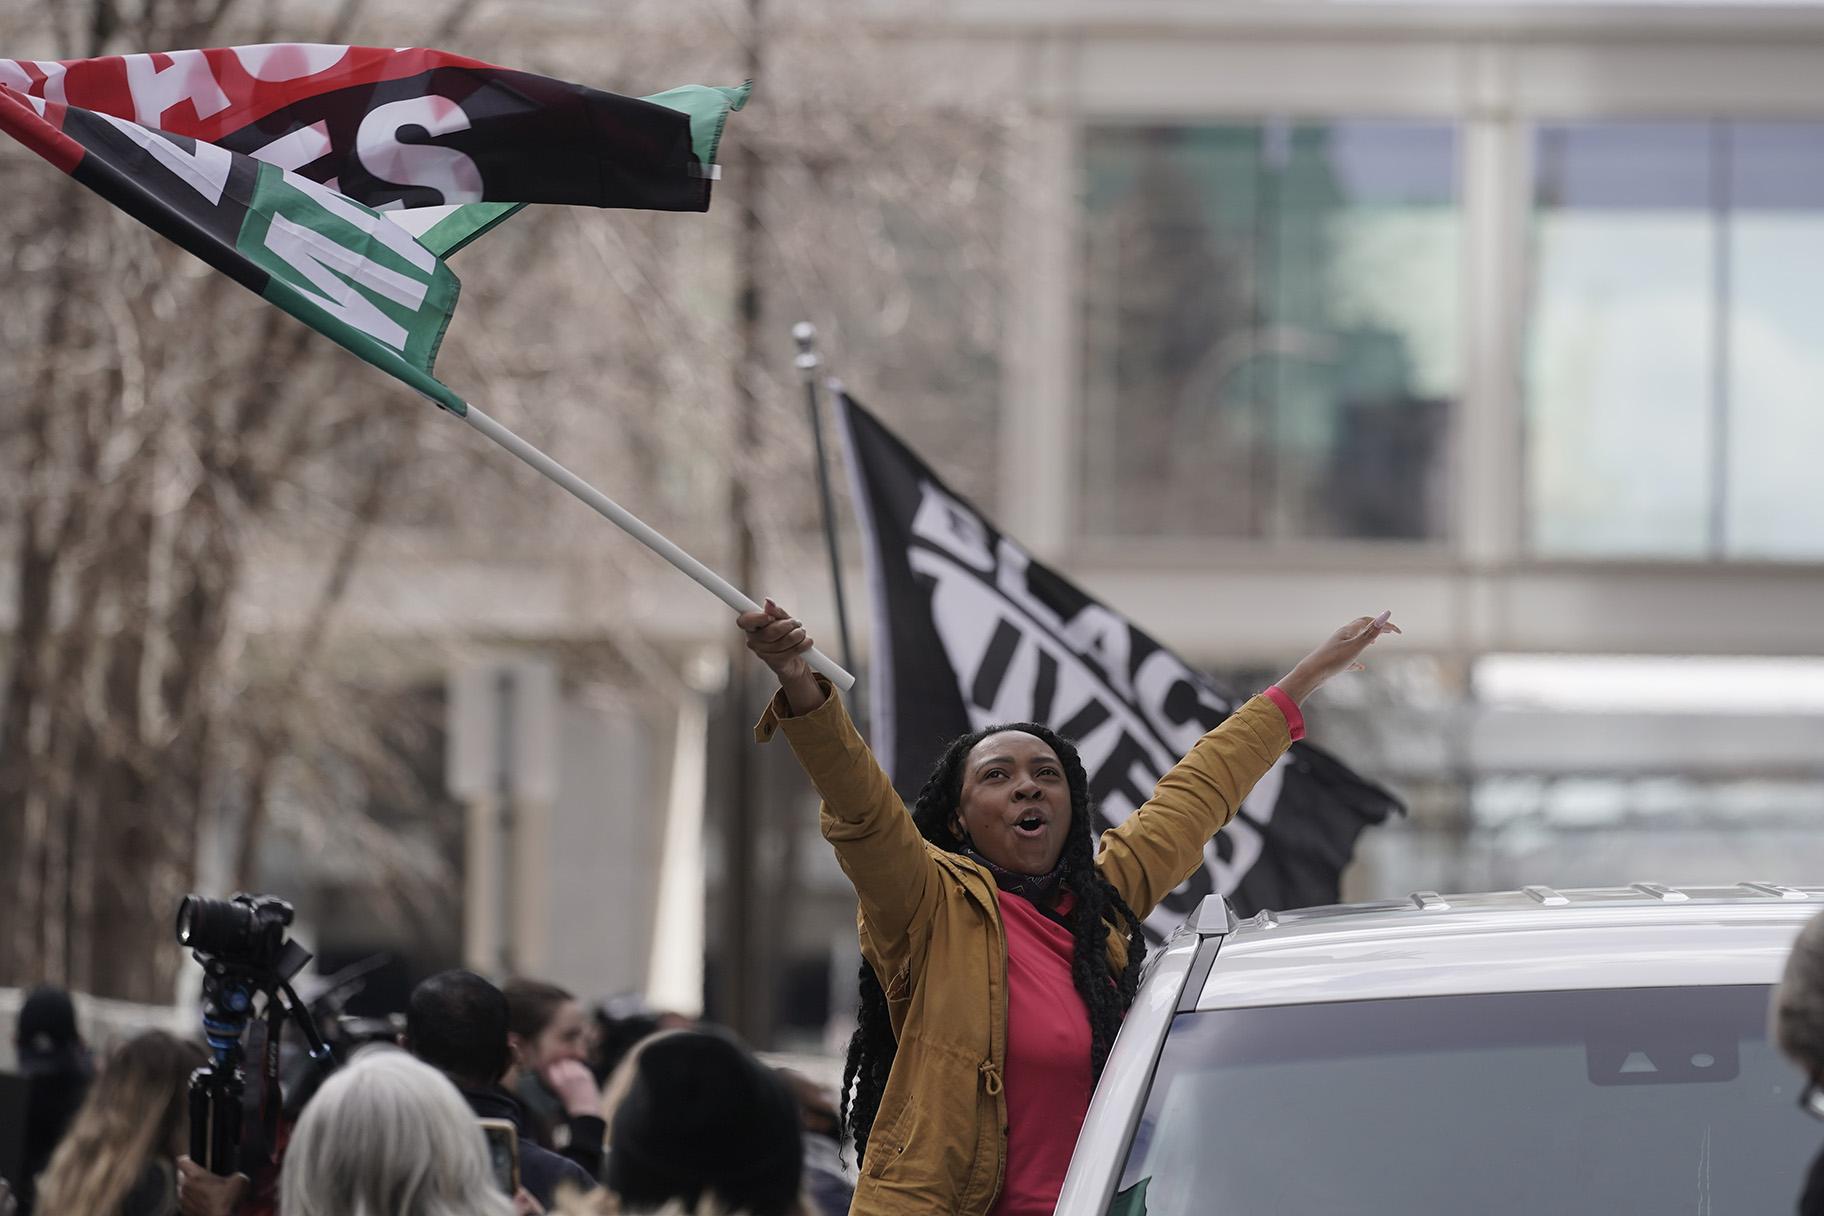 People cheer after a guilty verdict was announced at the trial of former Minneapolis police Officer Derek Chauvin for the 2020 death of George Floyd, Tuesday, April 20, 2021, in Minneapolis, Minn. (AP Photo / Morry Gash)